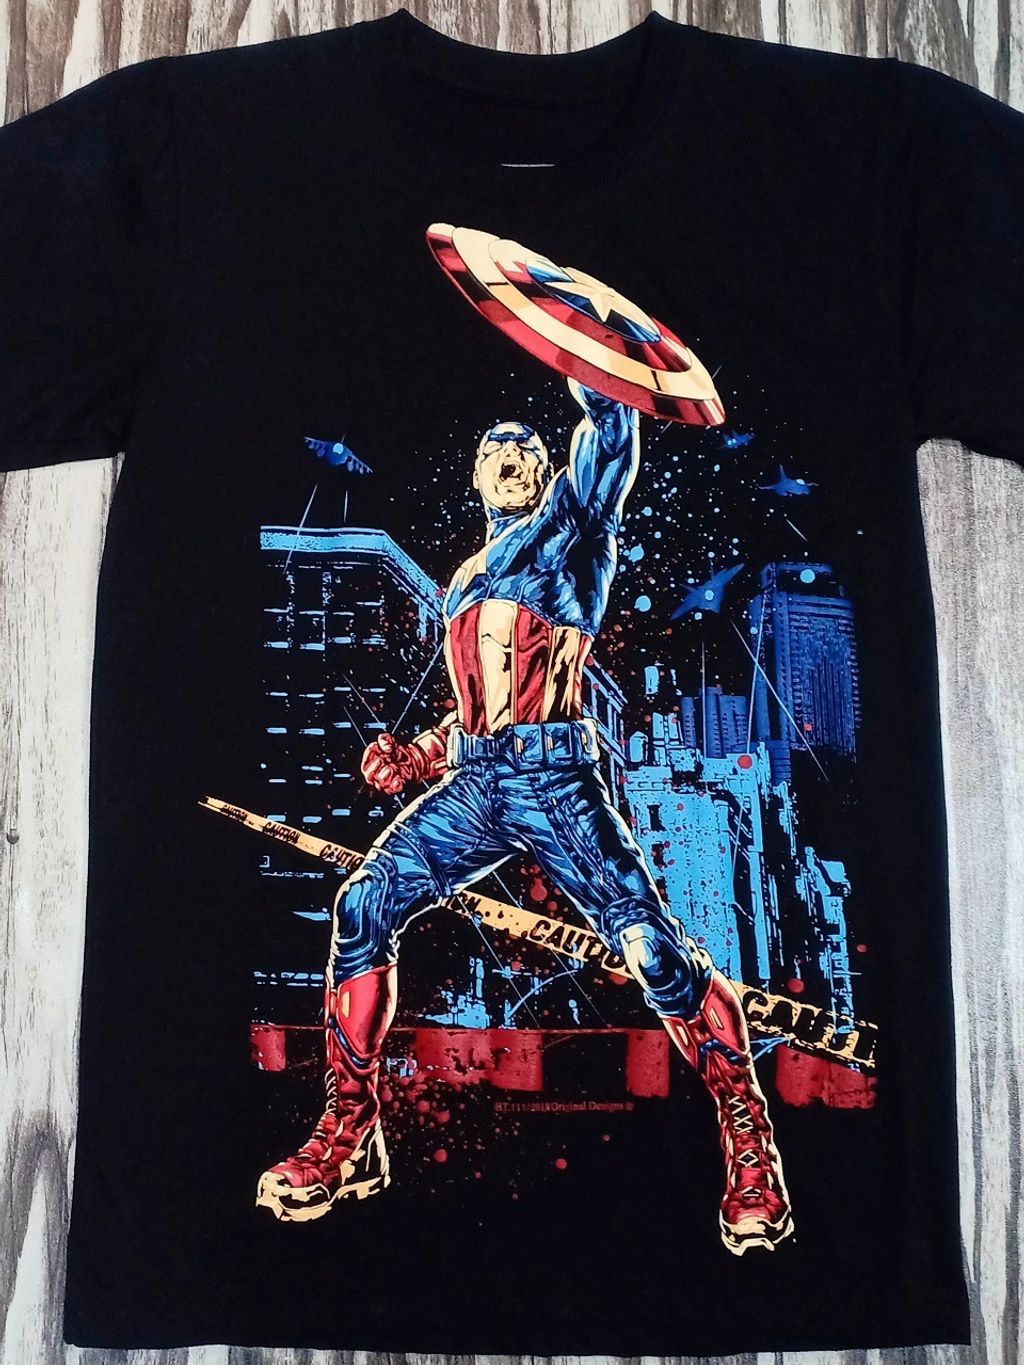 GRADE QUALITY AVENGERS HERO TIMBER TYPE BLACK MOVIE TSHIRT HIGH EDITION COLLECTABLE ROGERS MOAI CAPTAIN STEVE SYSTEM AMERICA T-SHIRT TIMBER BLACK SPEED COTTON SILK BT111 NEW – SCREEN COLLECTABLE PREMIUM STORE MARVEL